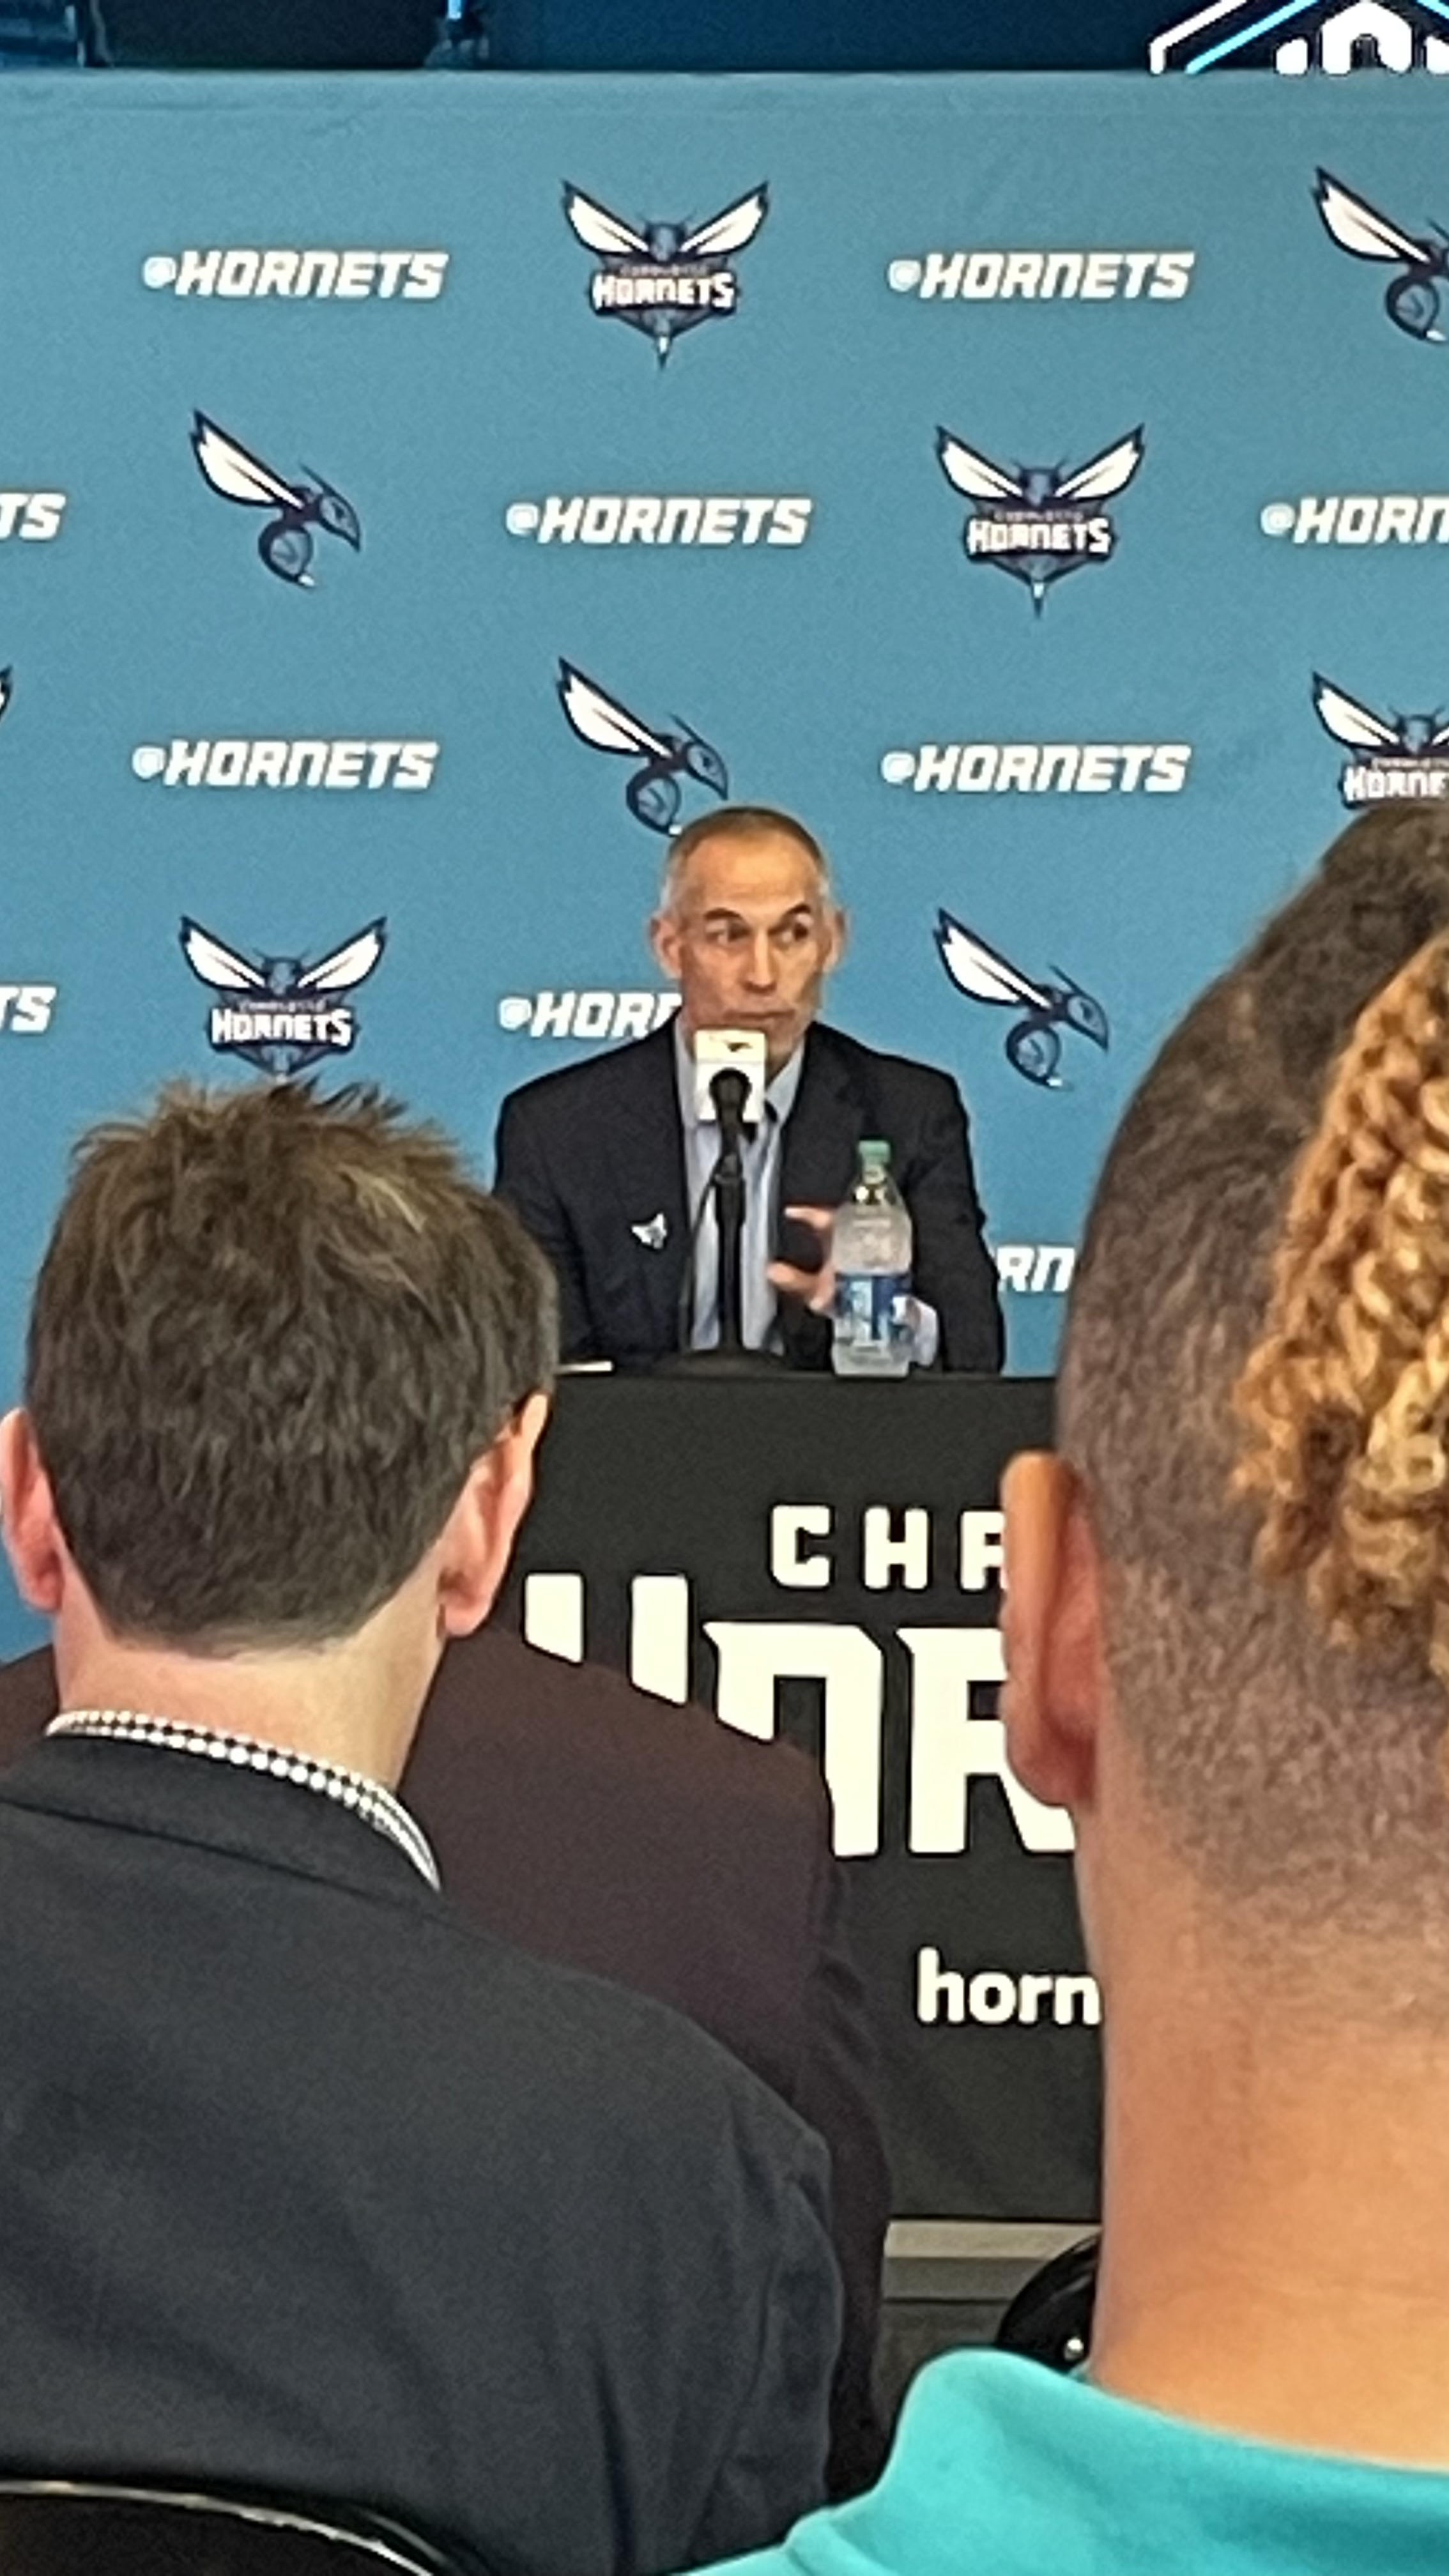 New Charlotte Hornets owners to face potential challenge with RSN situation